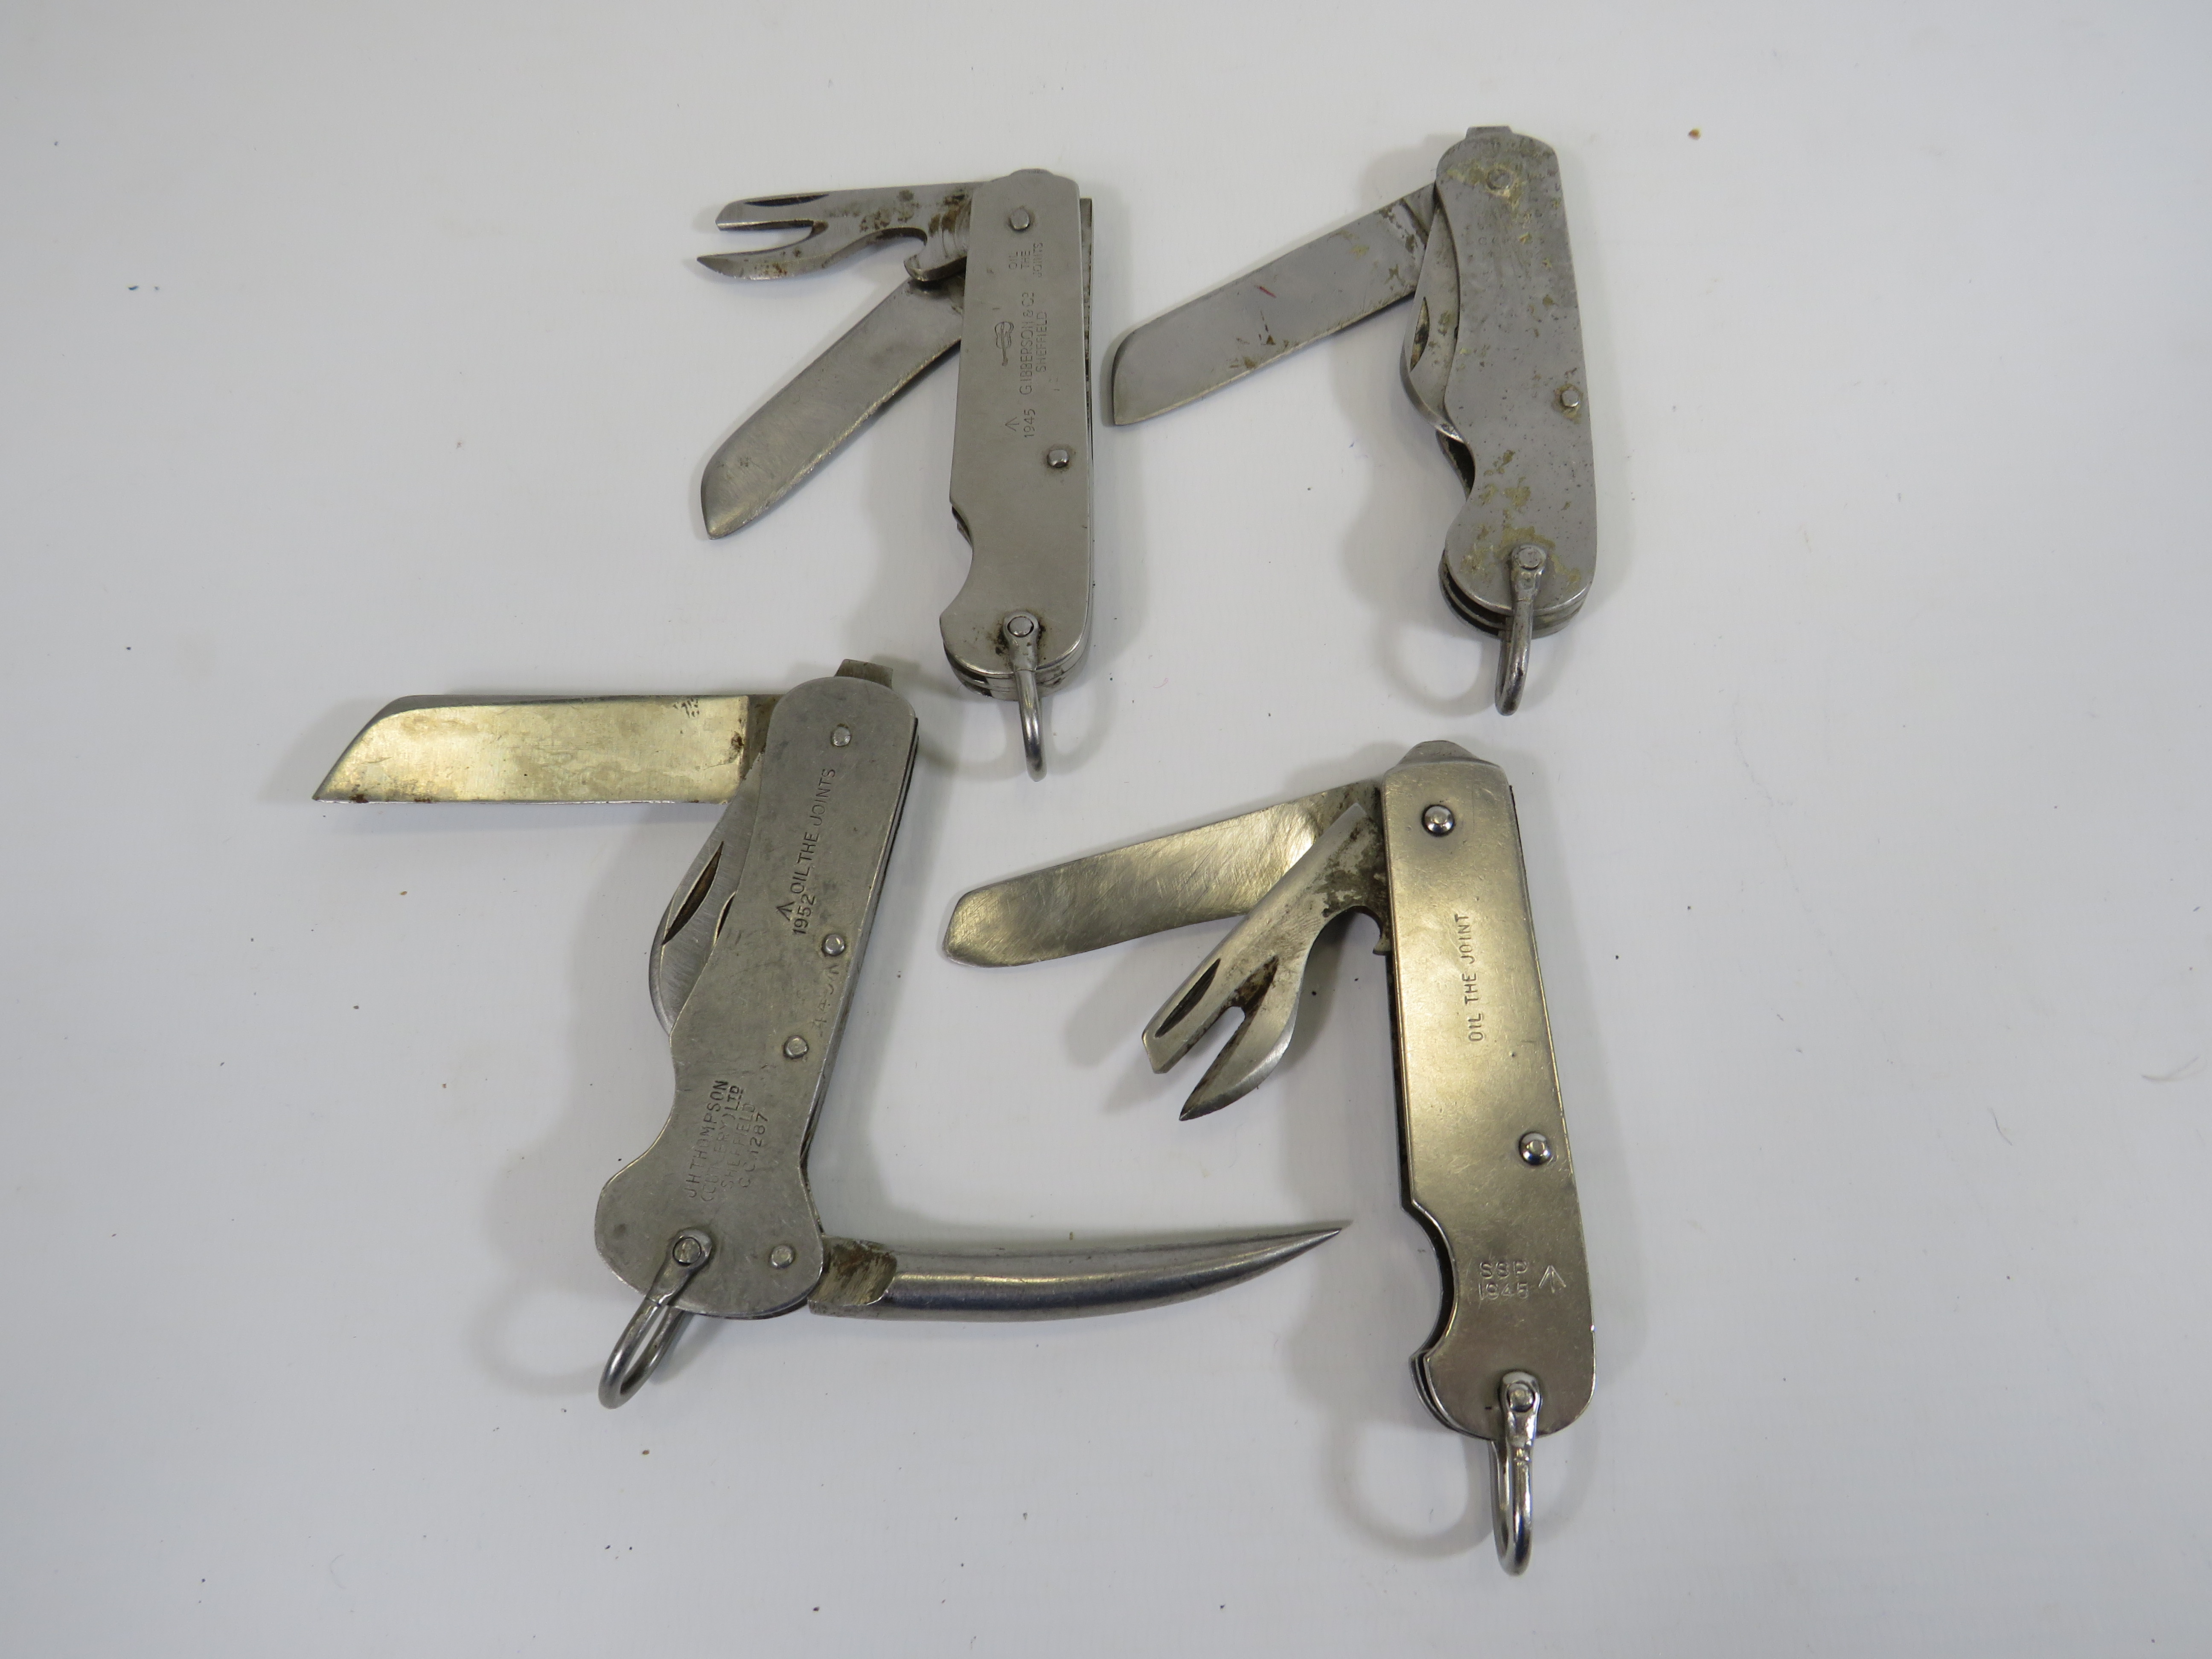 4 Military issue jack British army penknives 1940s/50s.